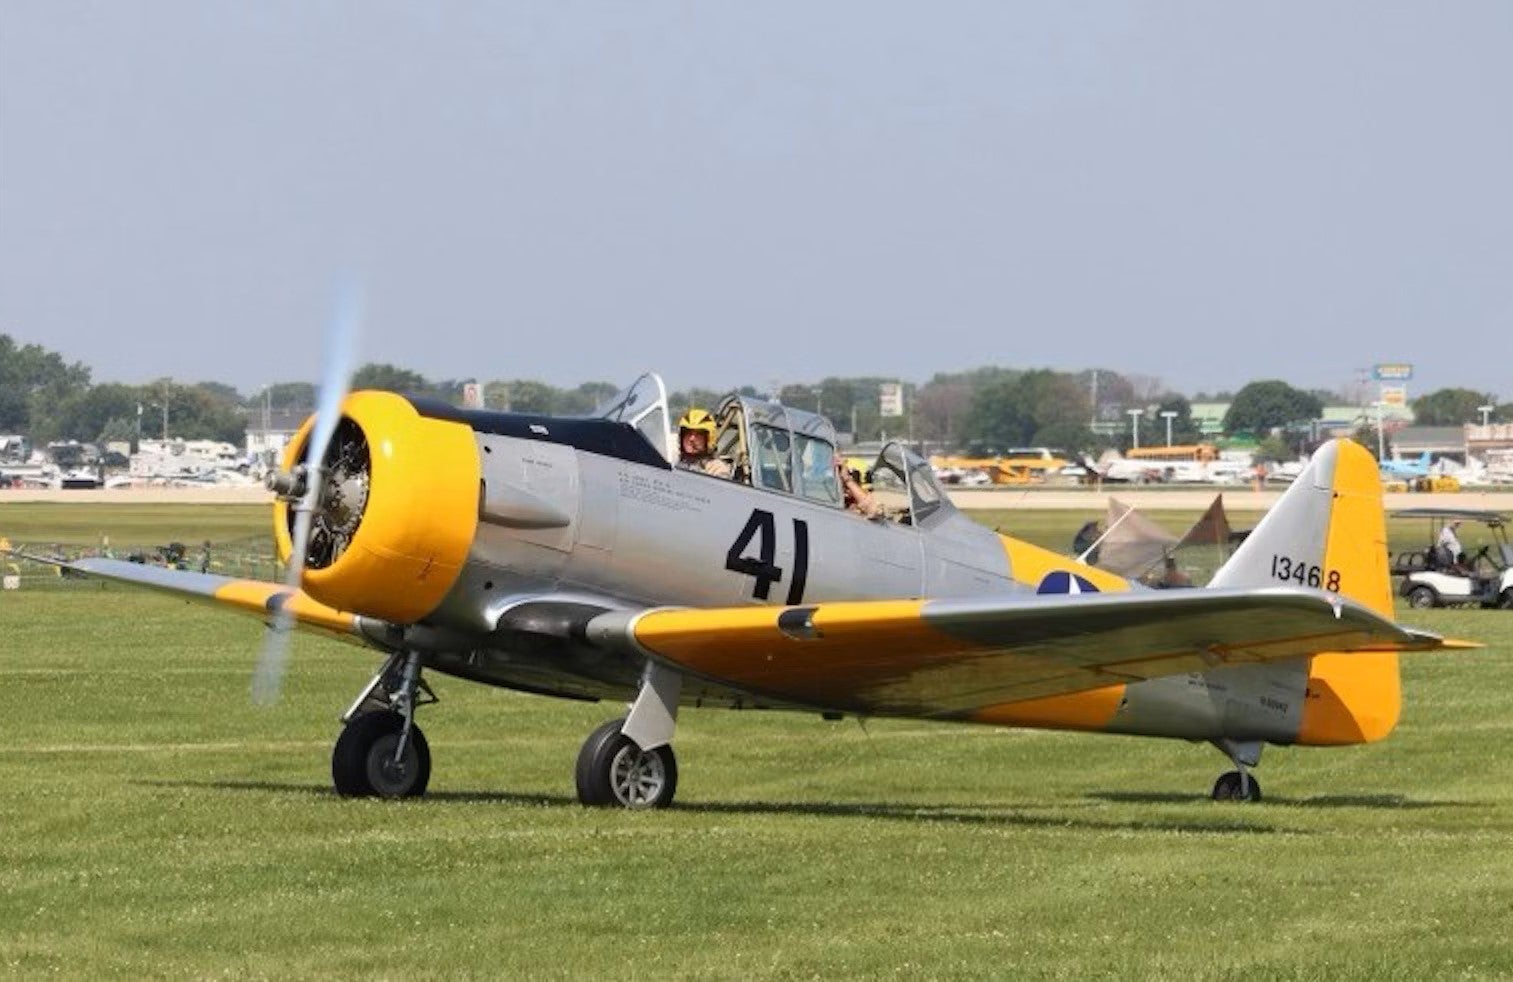 Today’s Top Aircraft For Sale Pick: 1941 North American AT-6D Texan